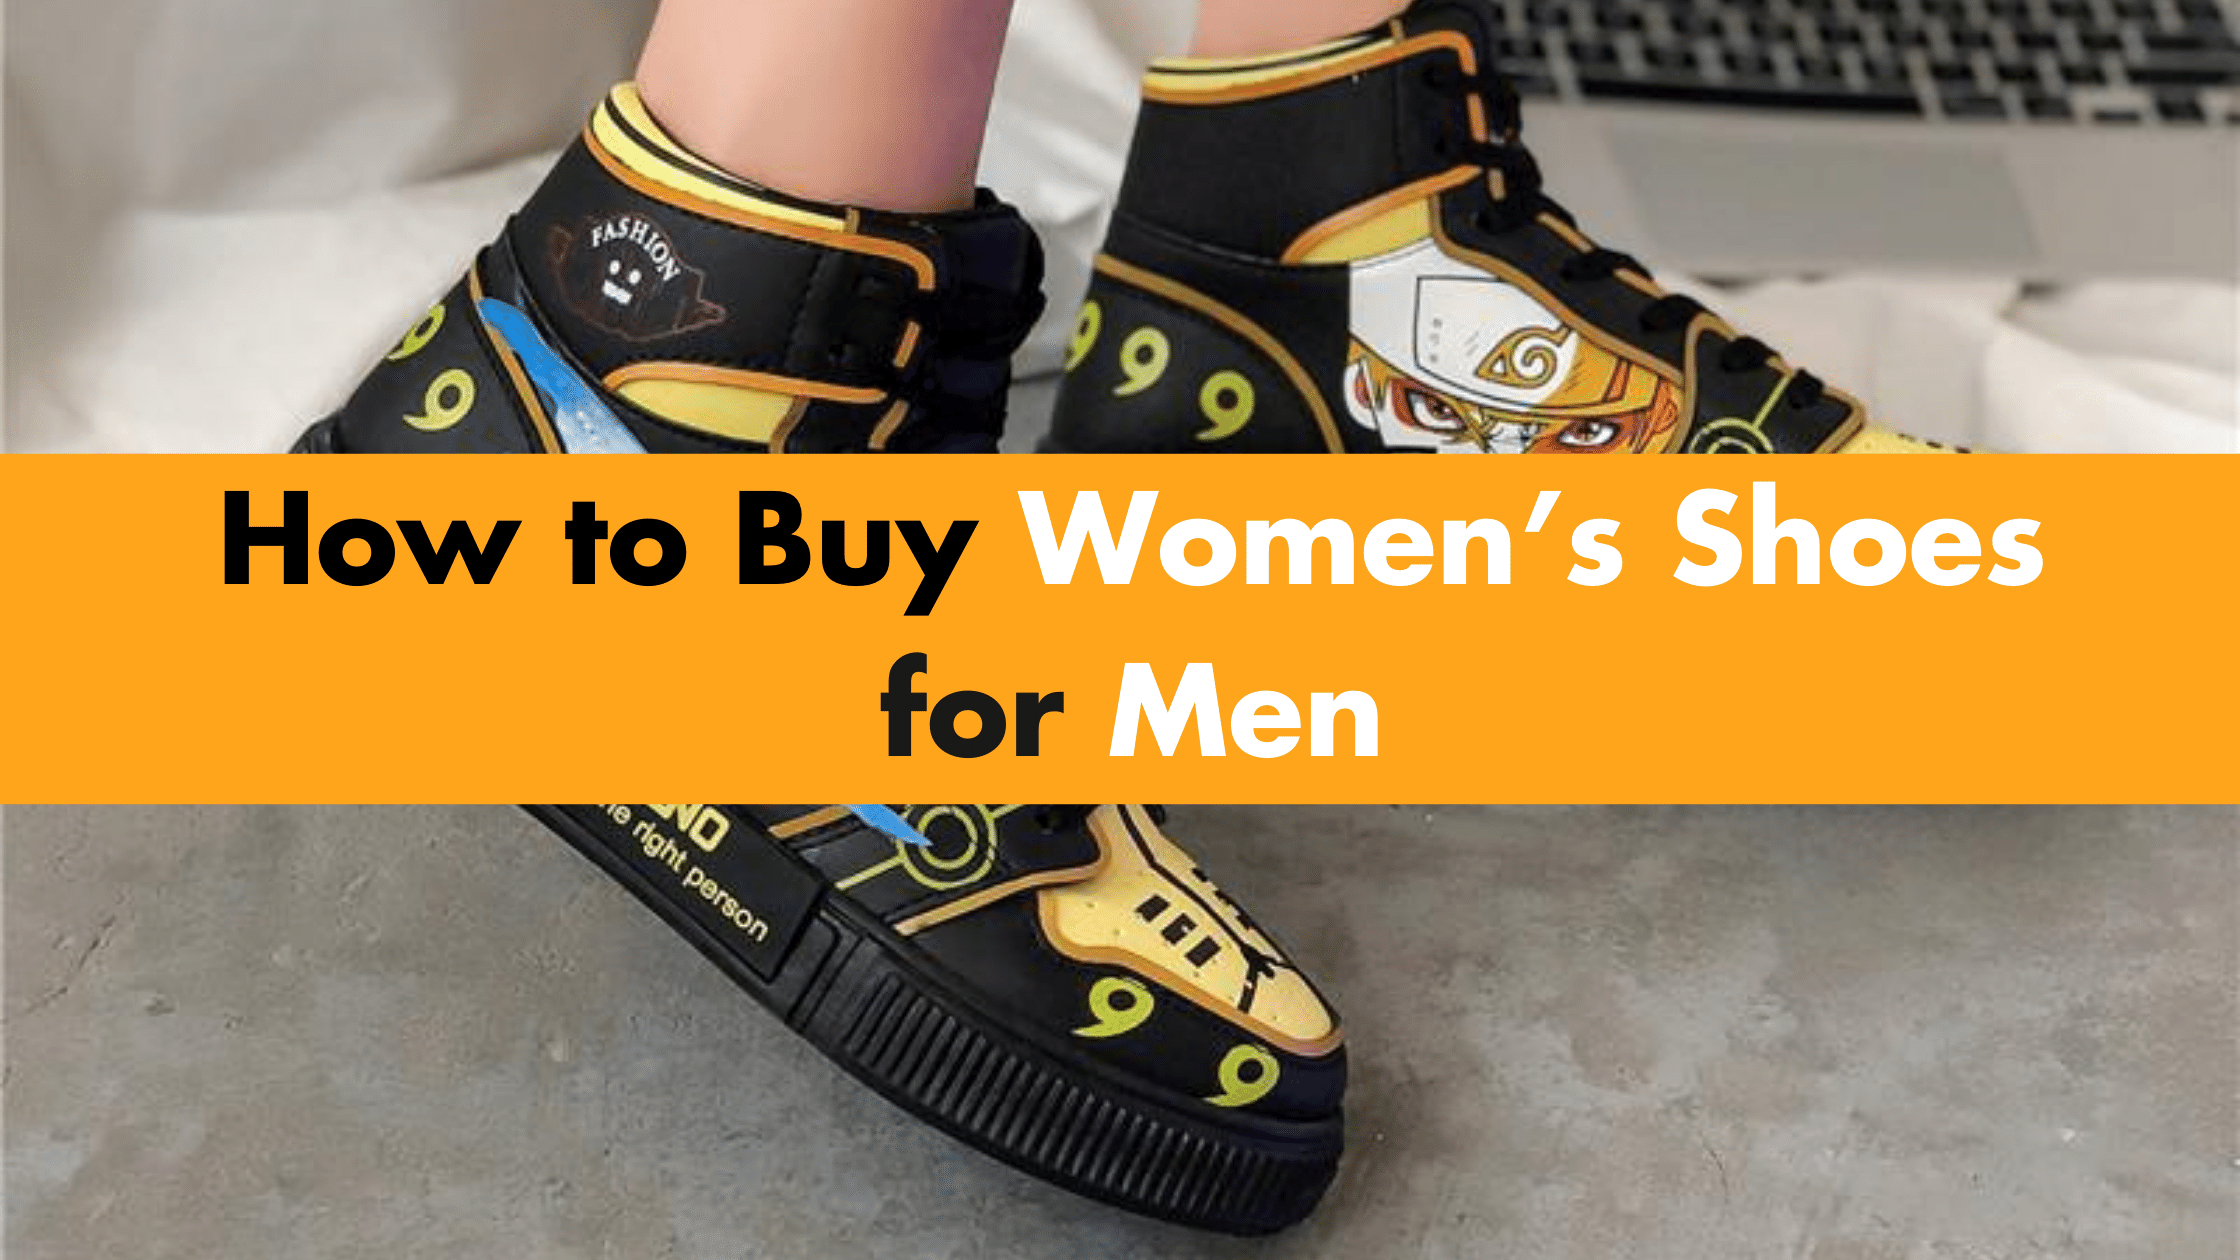 How to Buy Women’s Shoes for Men? 